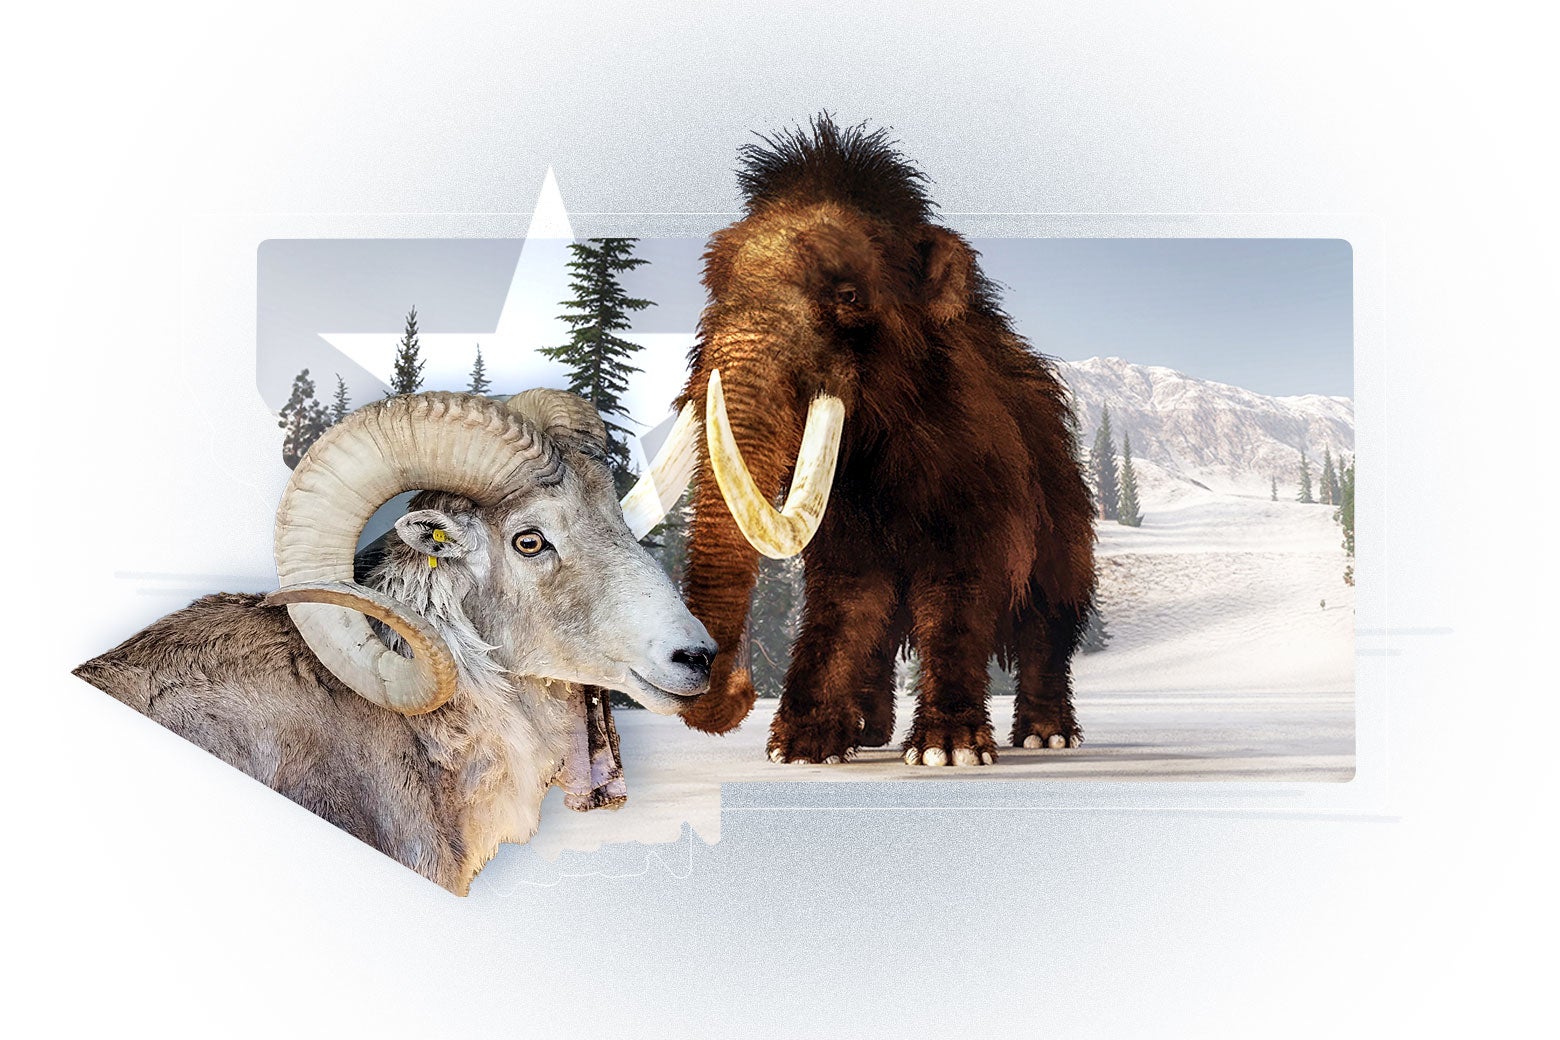 The Montana Mountain King in collage with a woolly mammoth and the map of Montana.